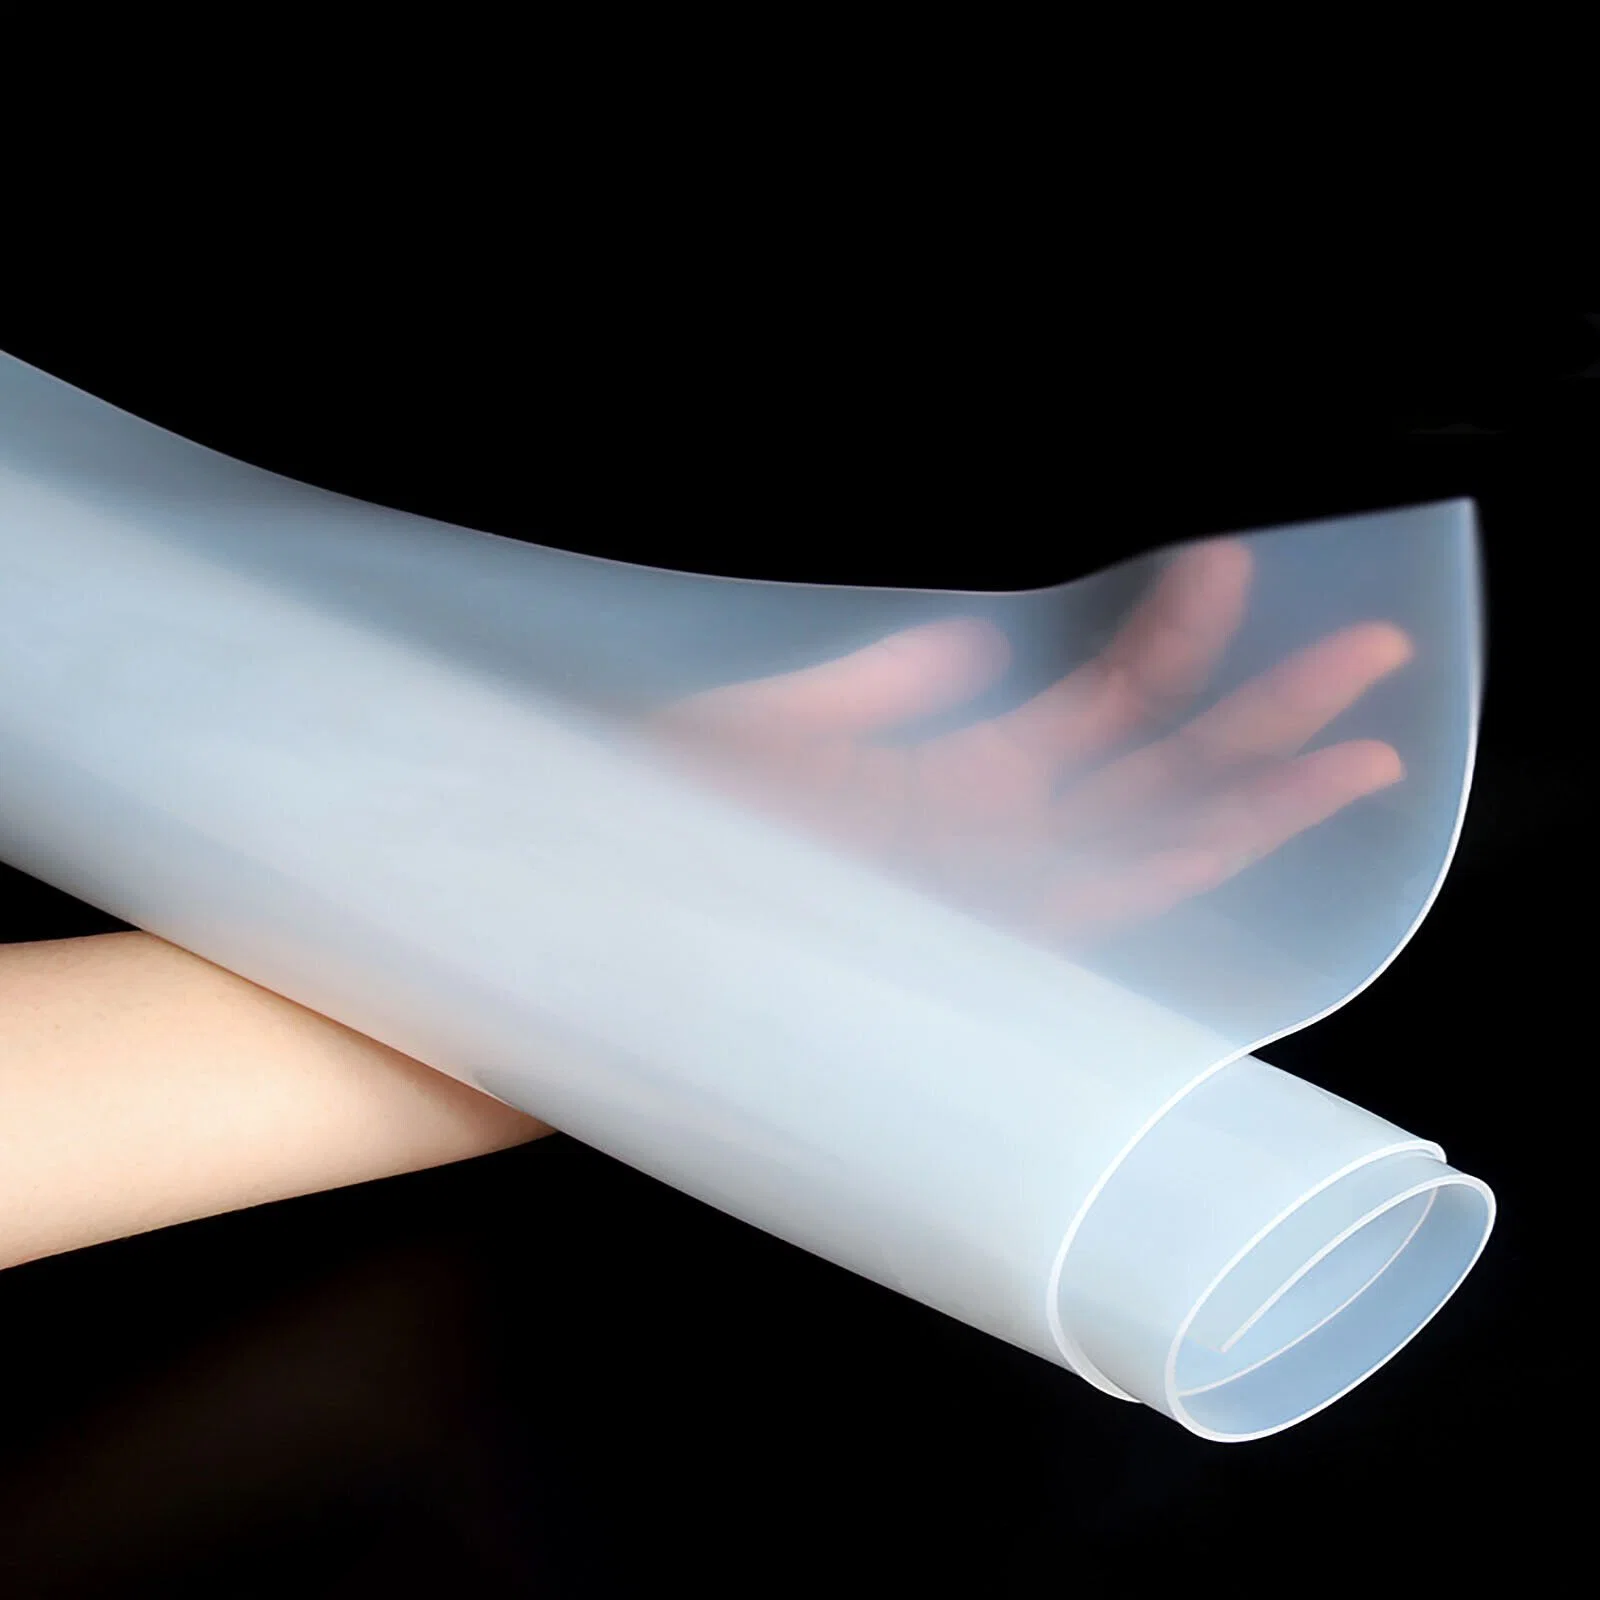 White Natural High Temperature Resistant Thin Soft Solid Clear Silicone Rubber Sheet Roll